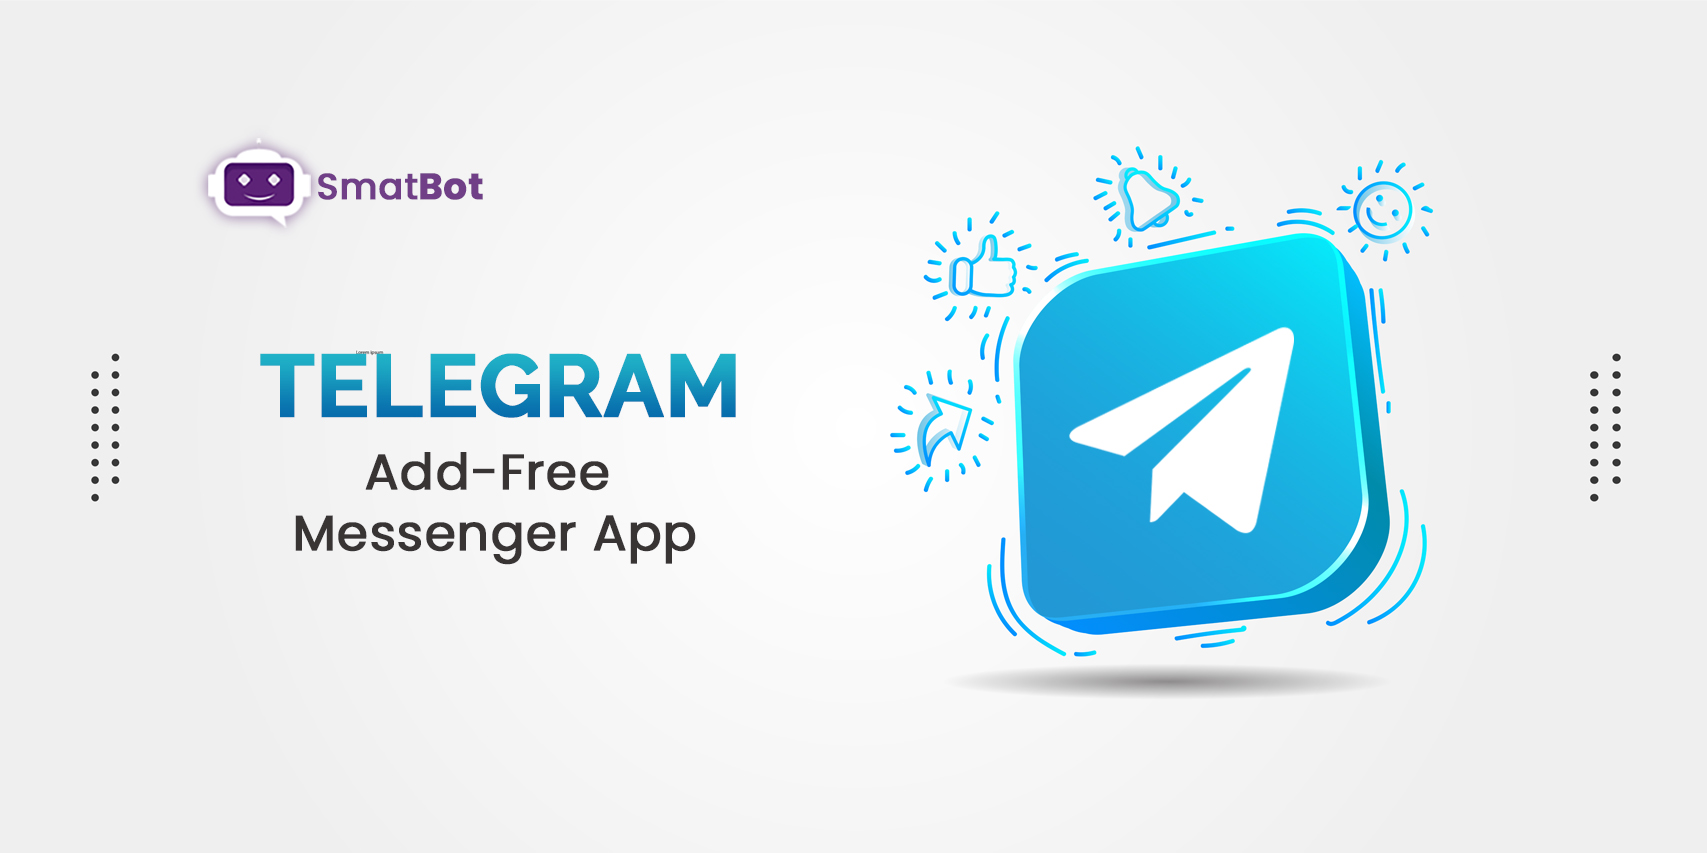 what is the telegram app used for